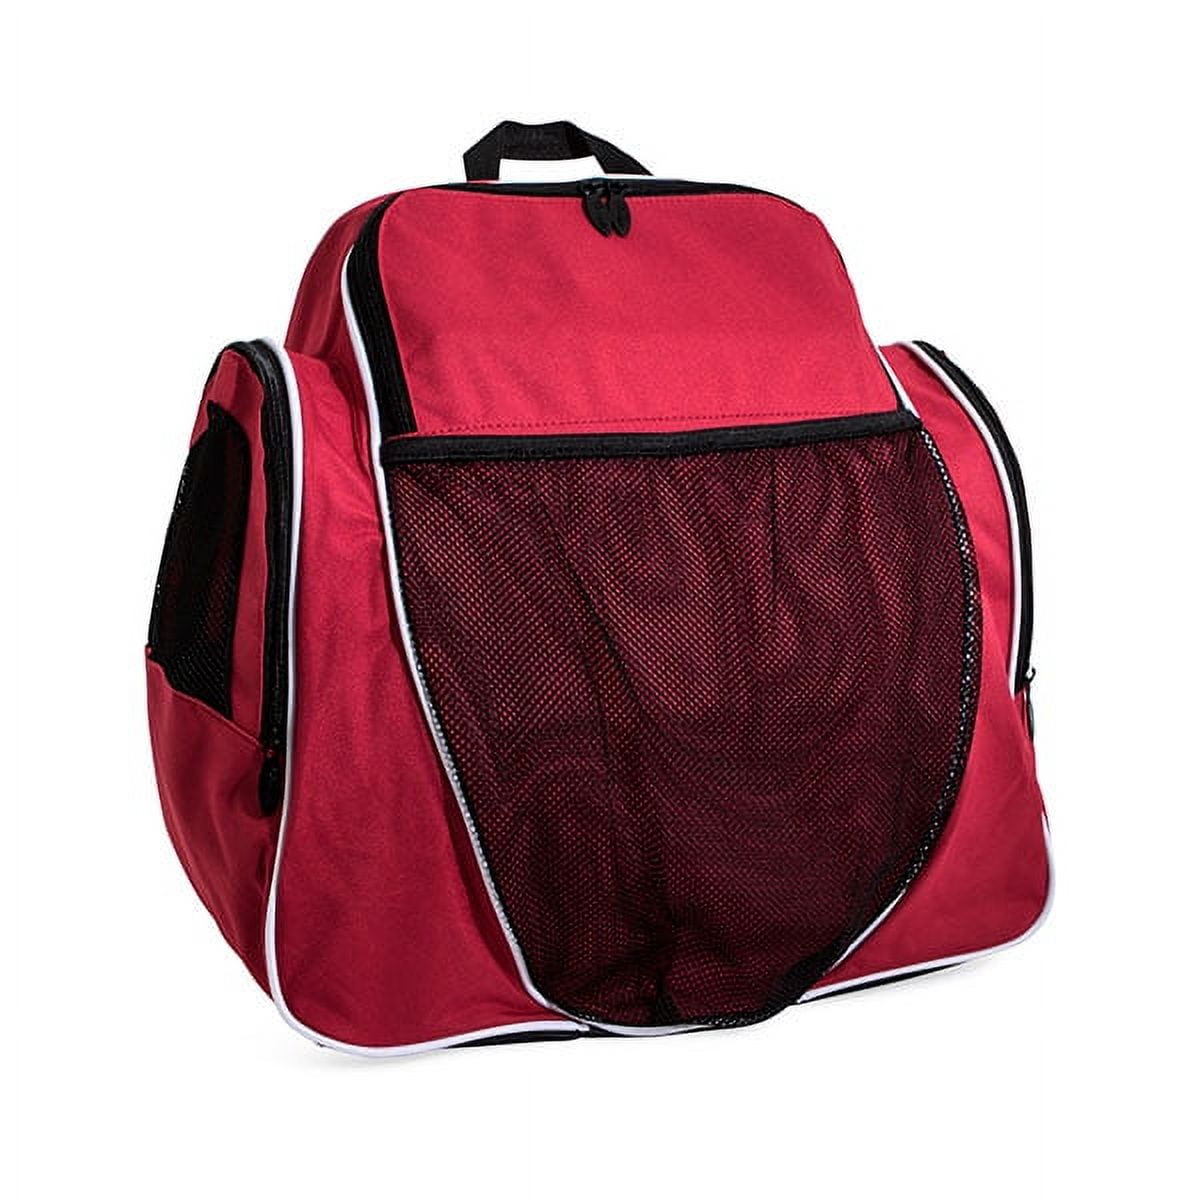 Bp1810rd 18 X 19 X 10 In. Deluxe All Purpose Backpack, Red